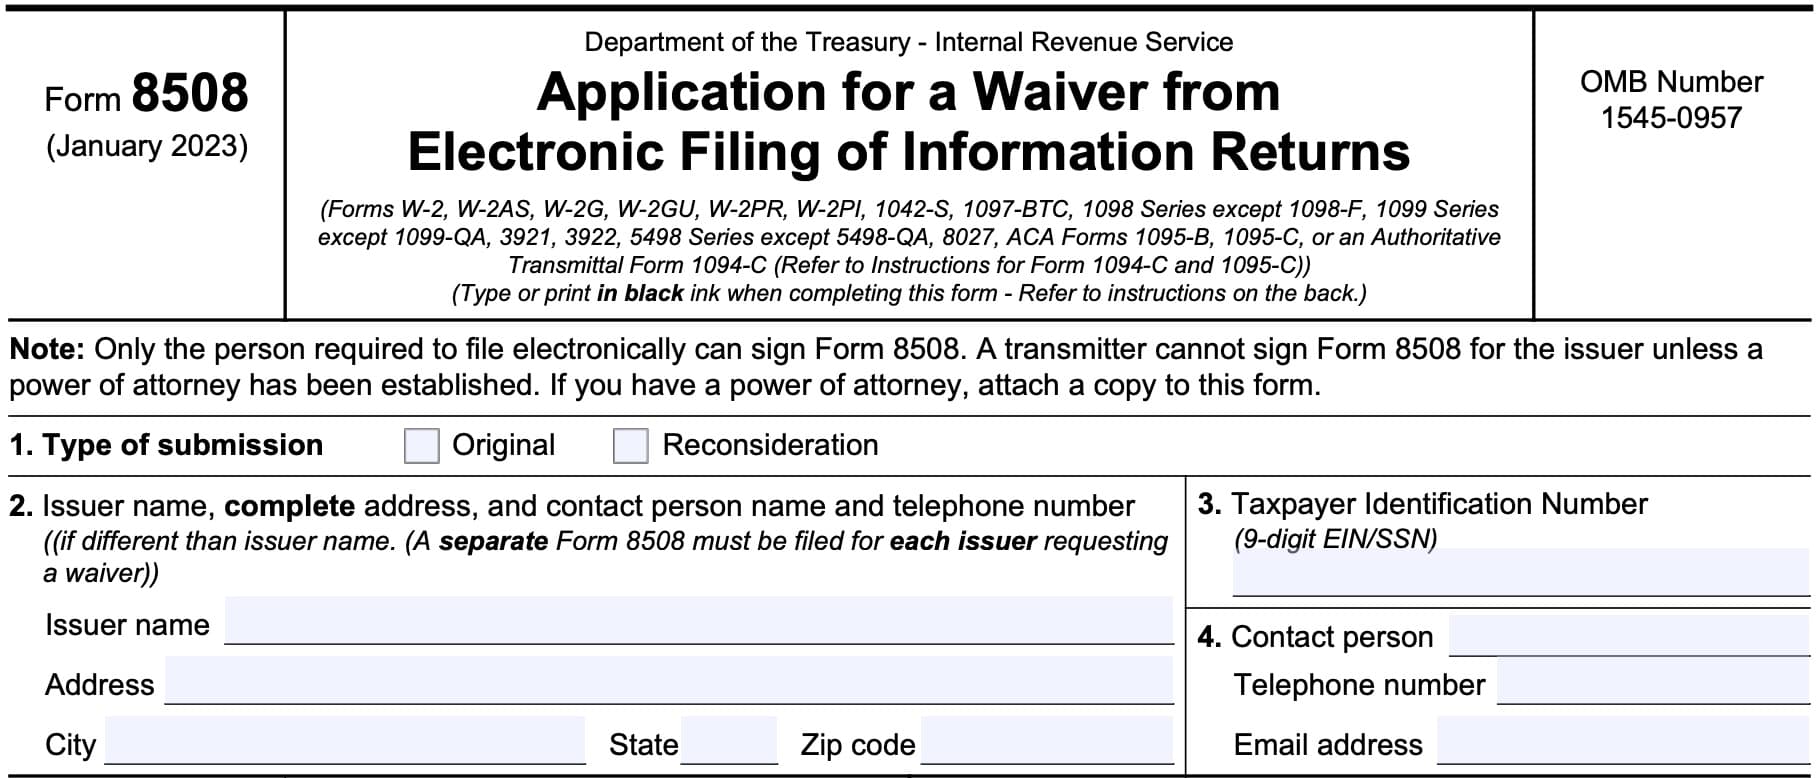 irs form 8508, application for a waiver from electronic filing of information returns, lines 1 through 4